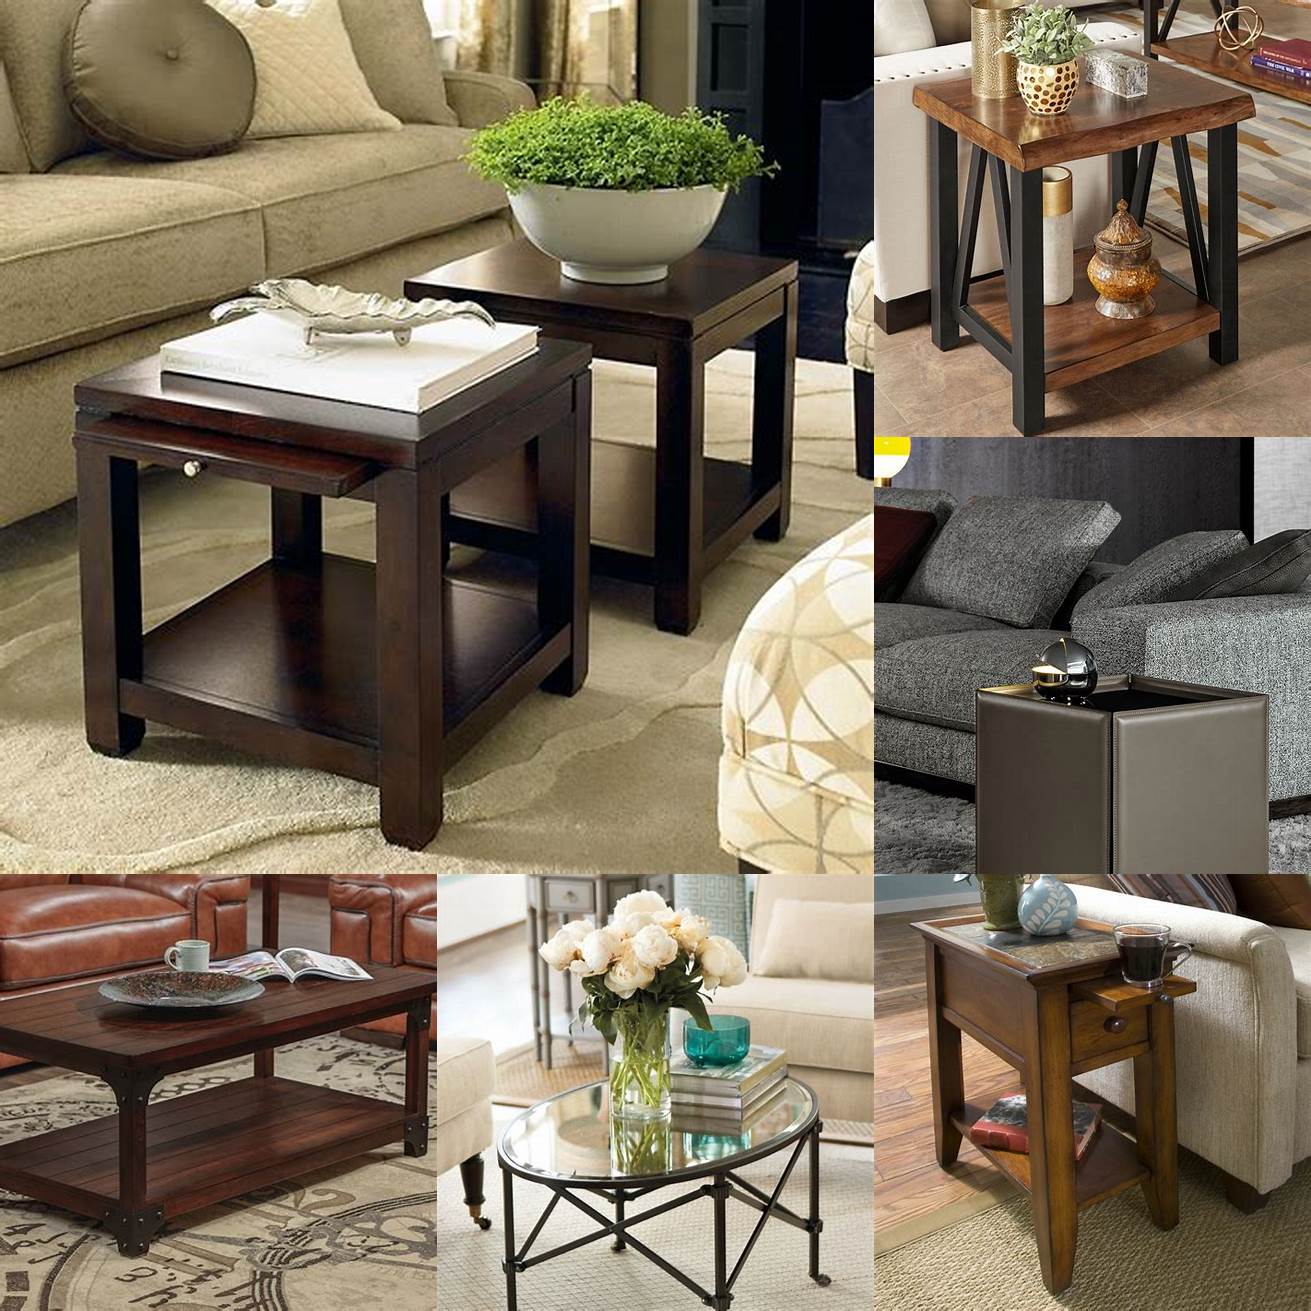 Coffee tables and side tables Coffee tables and side tables can provide a surface for drinks books and other items You can choose a table with a similar style or material as your sofa to create a cohesive look